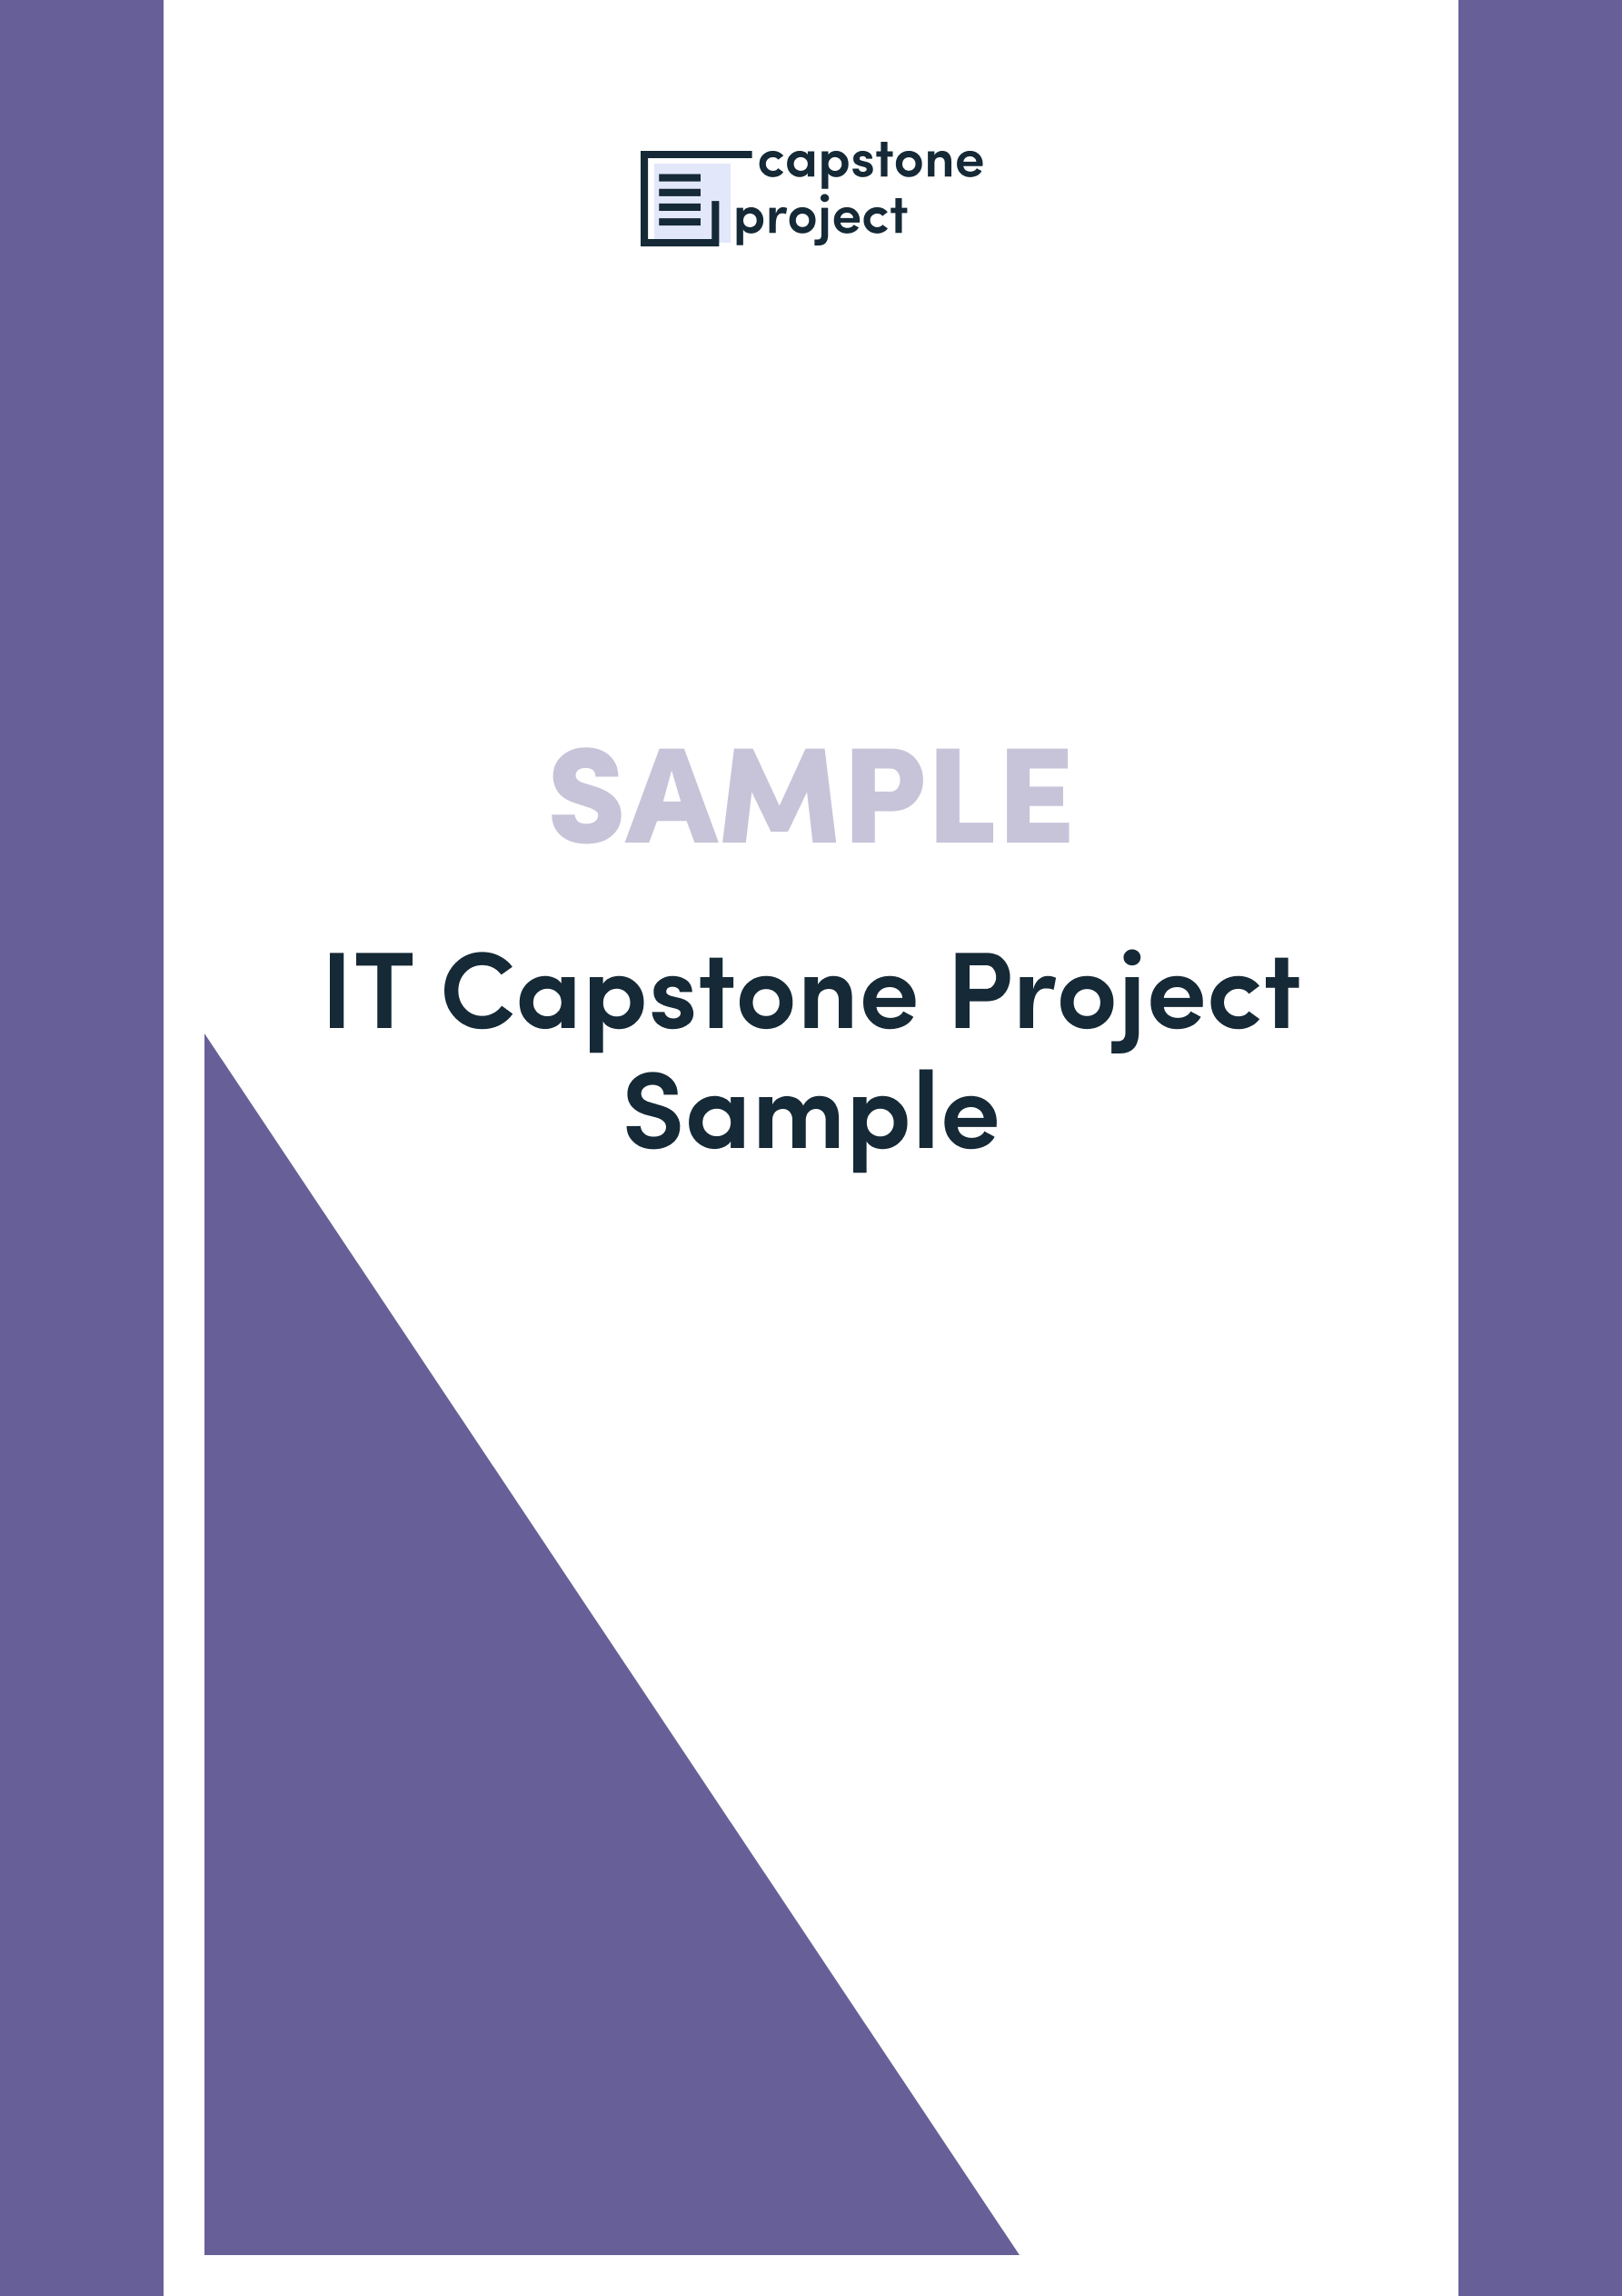 sample system for capstone project